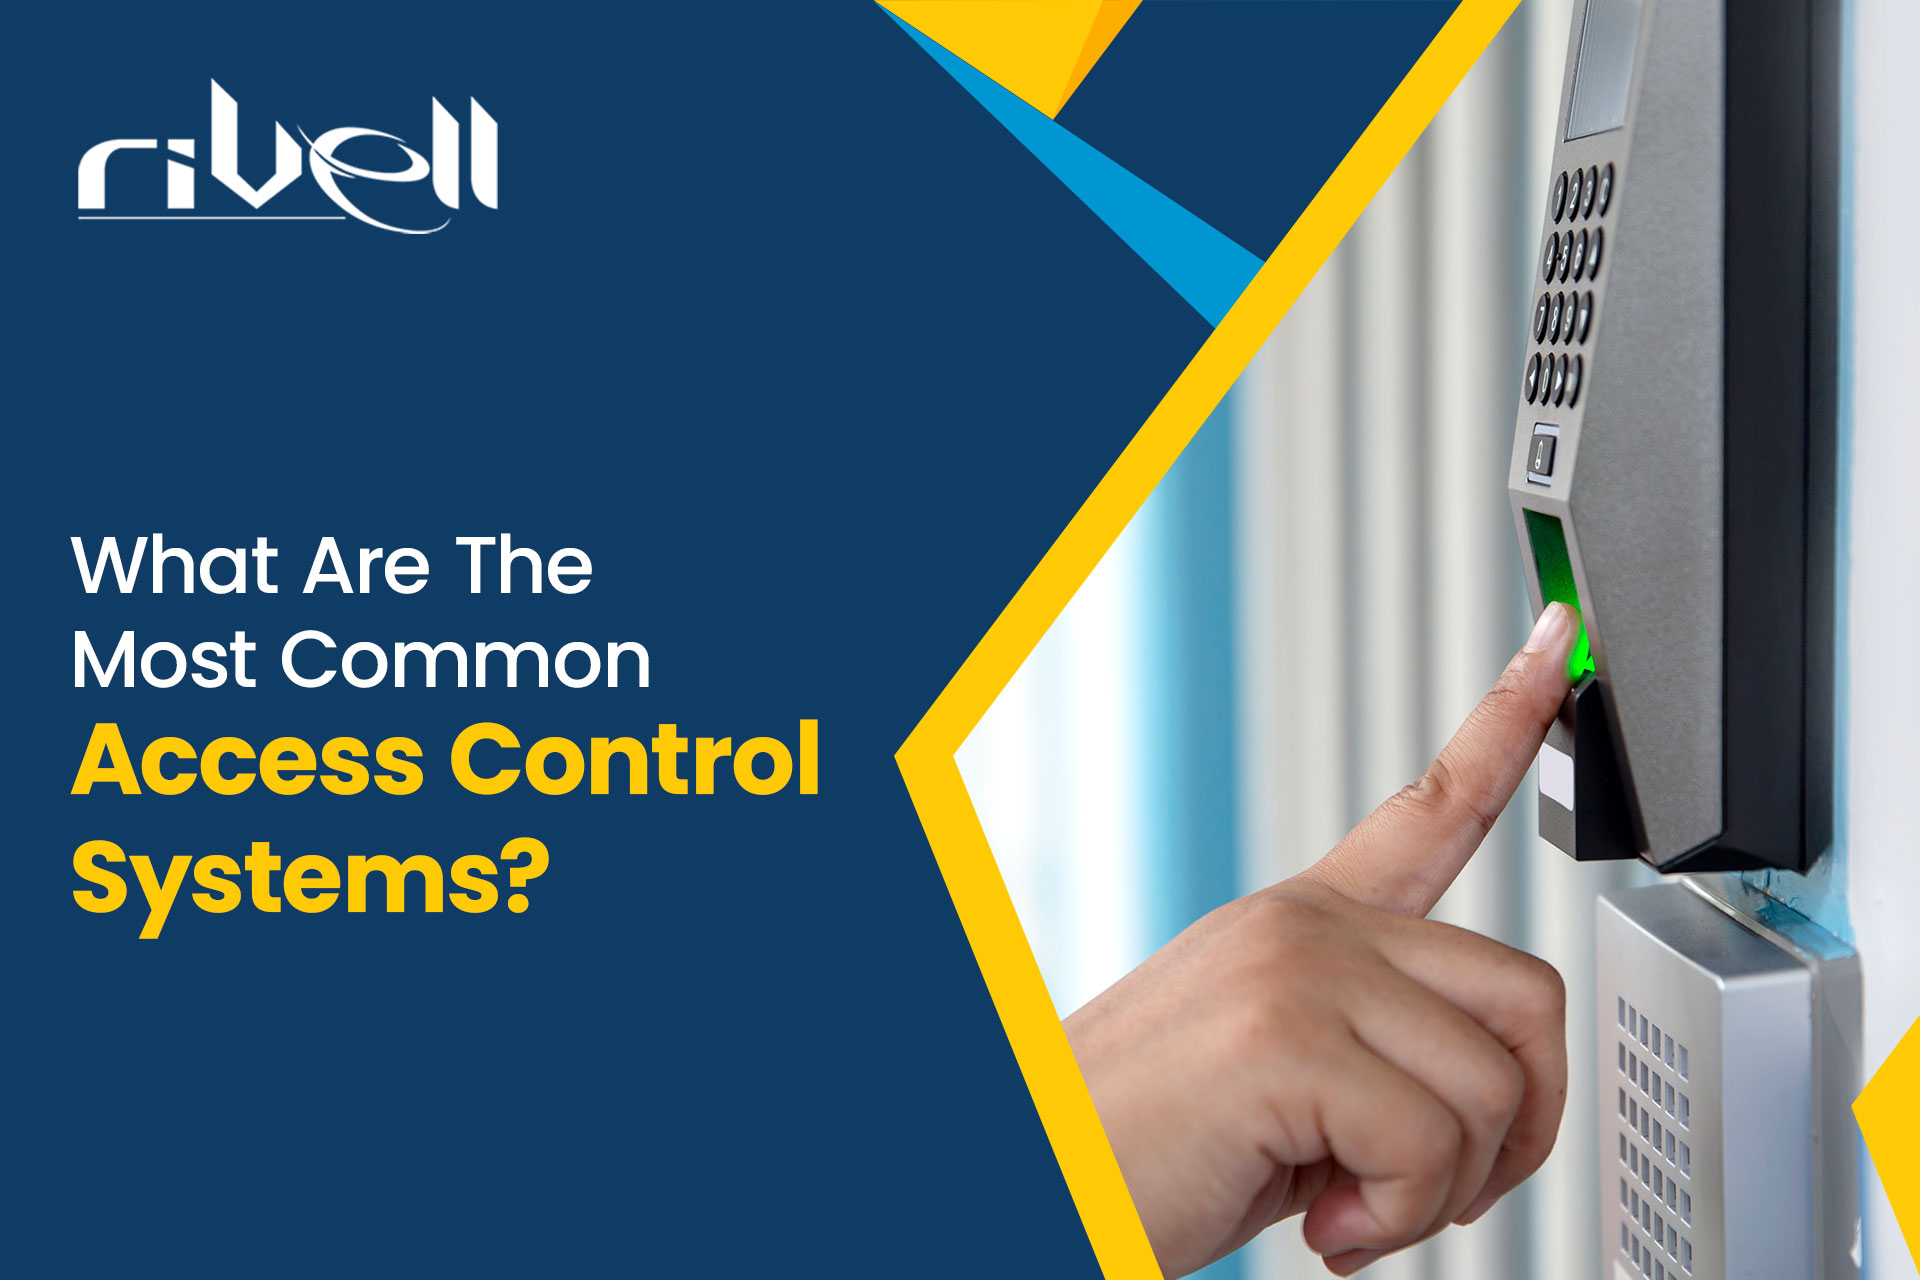 What are the most common access control systems